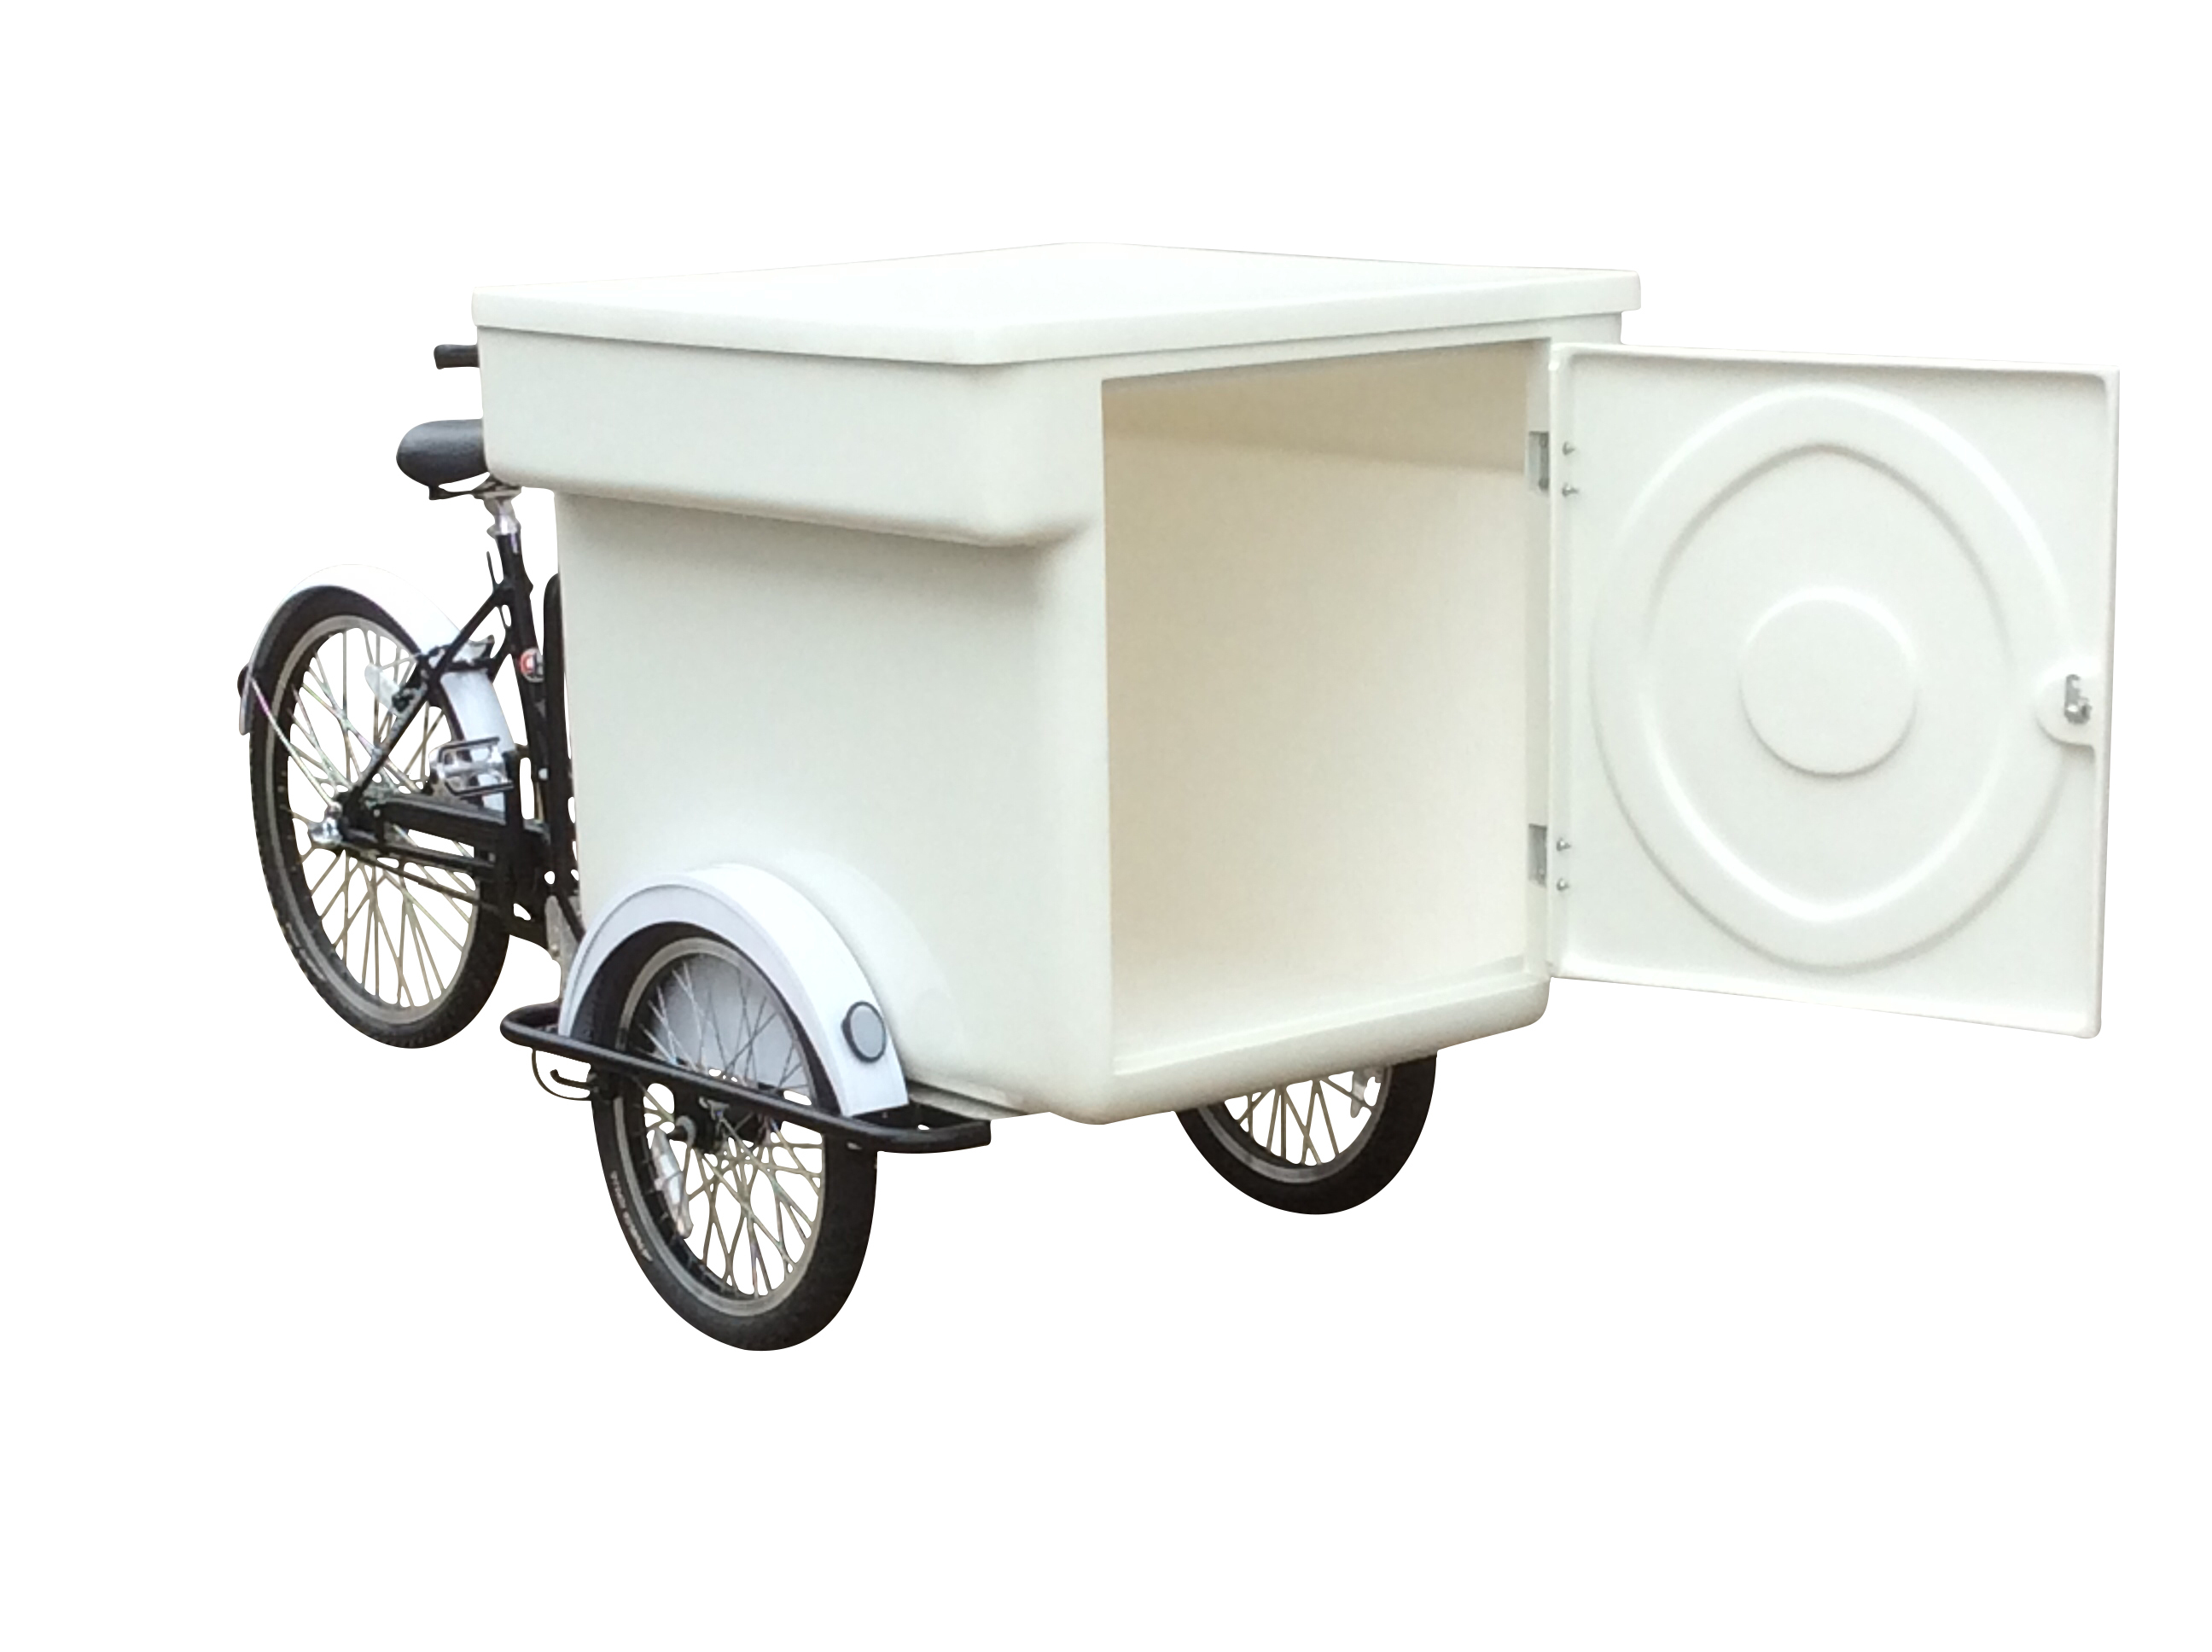 Triciclo_Versa_Catering_bike_cargo_tricycle_1